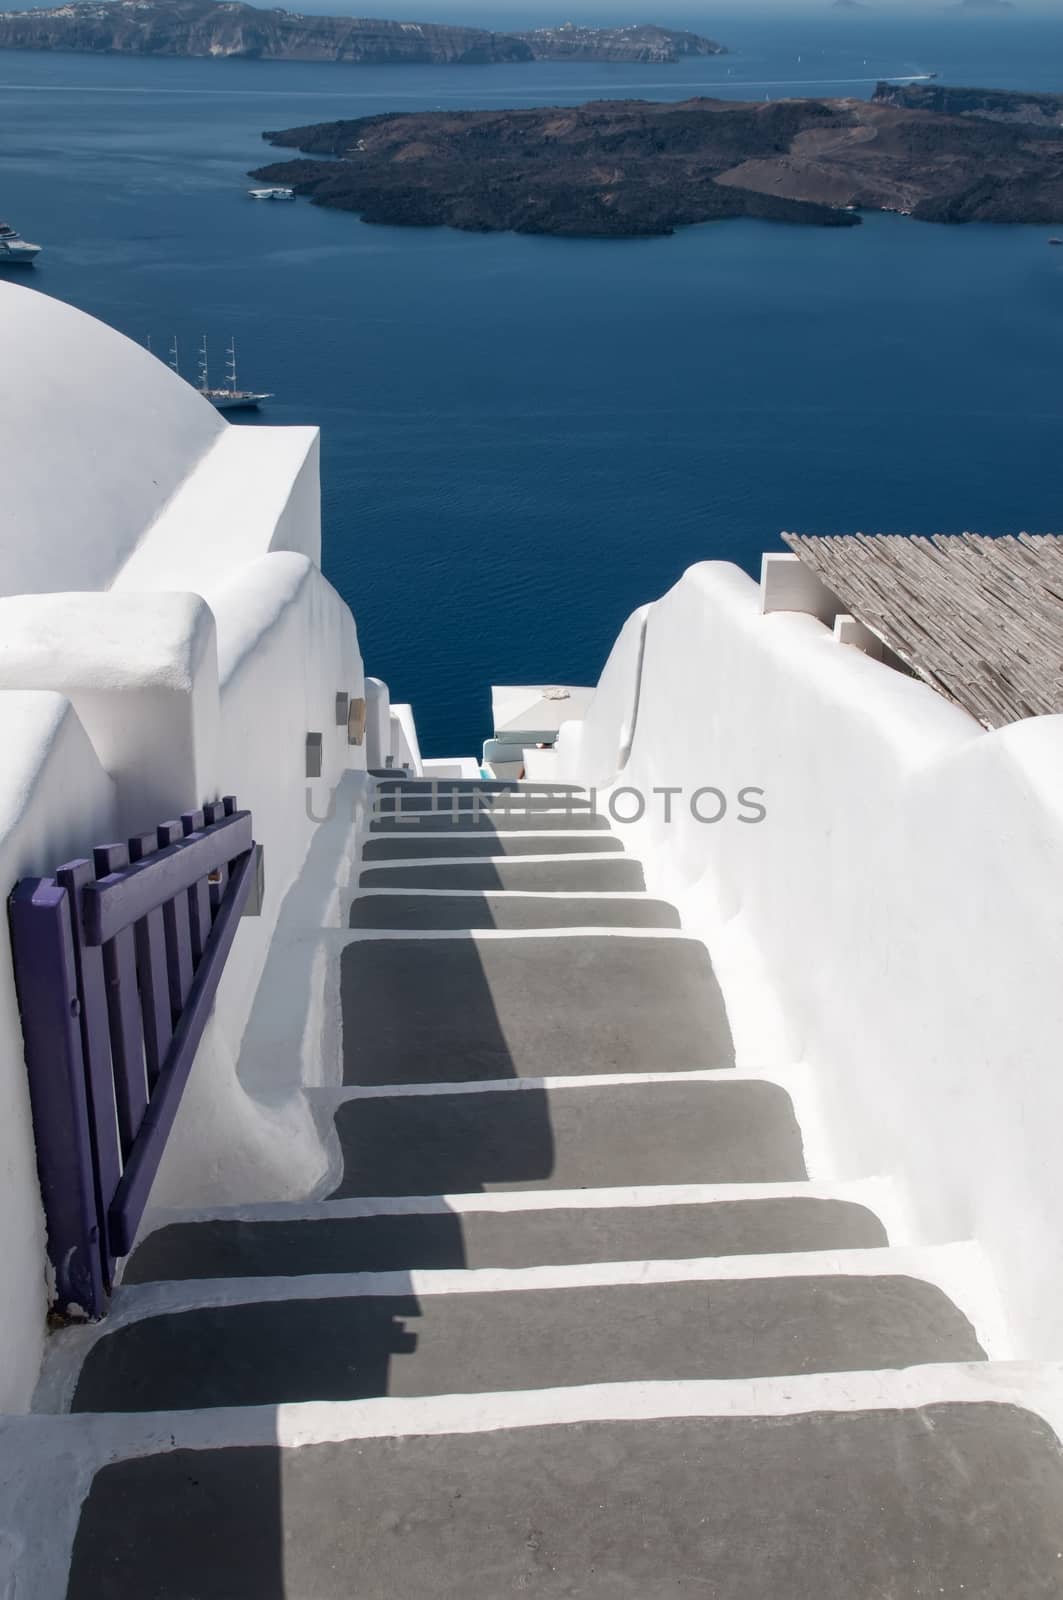 Oia is a village in the north west edge of the Santorini island with white houses and amazing seaviews.